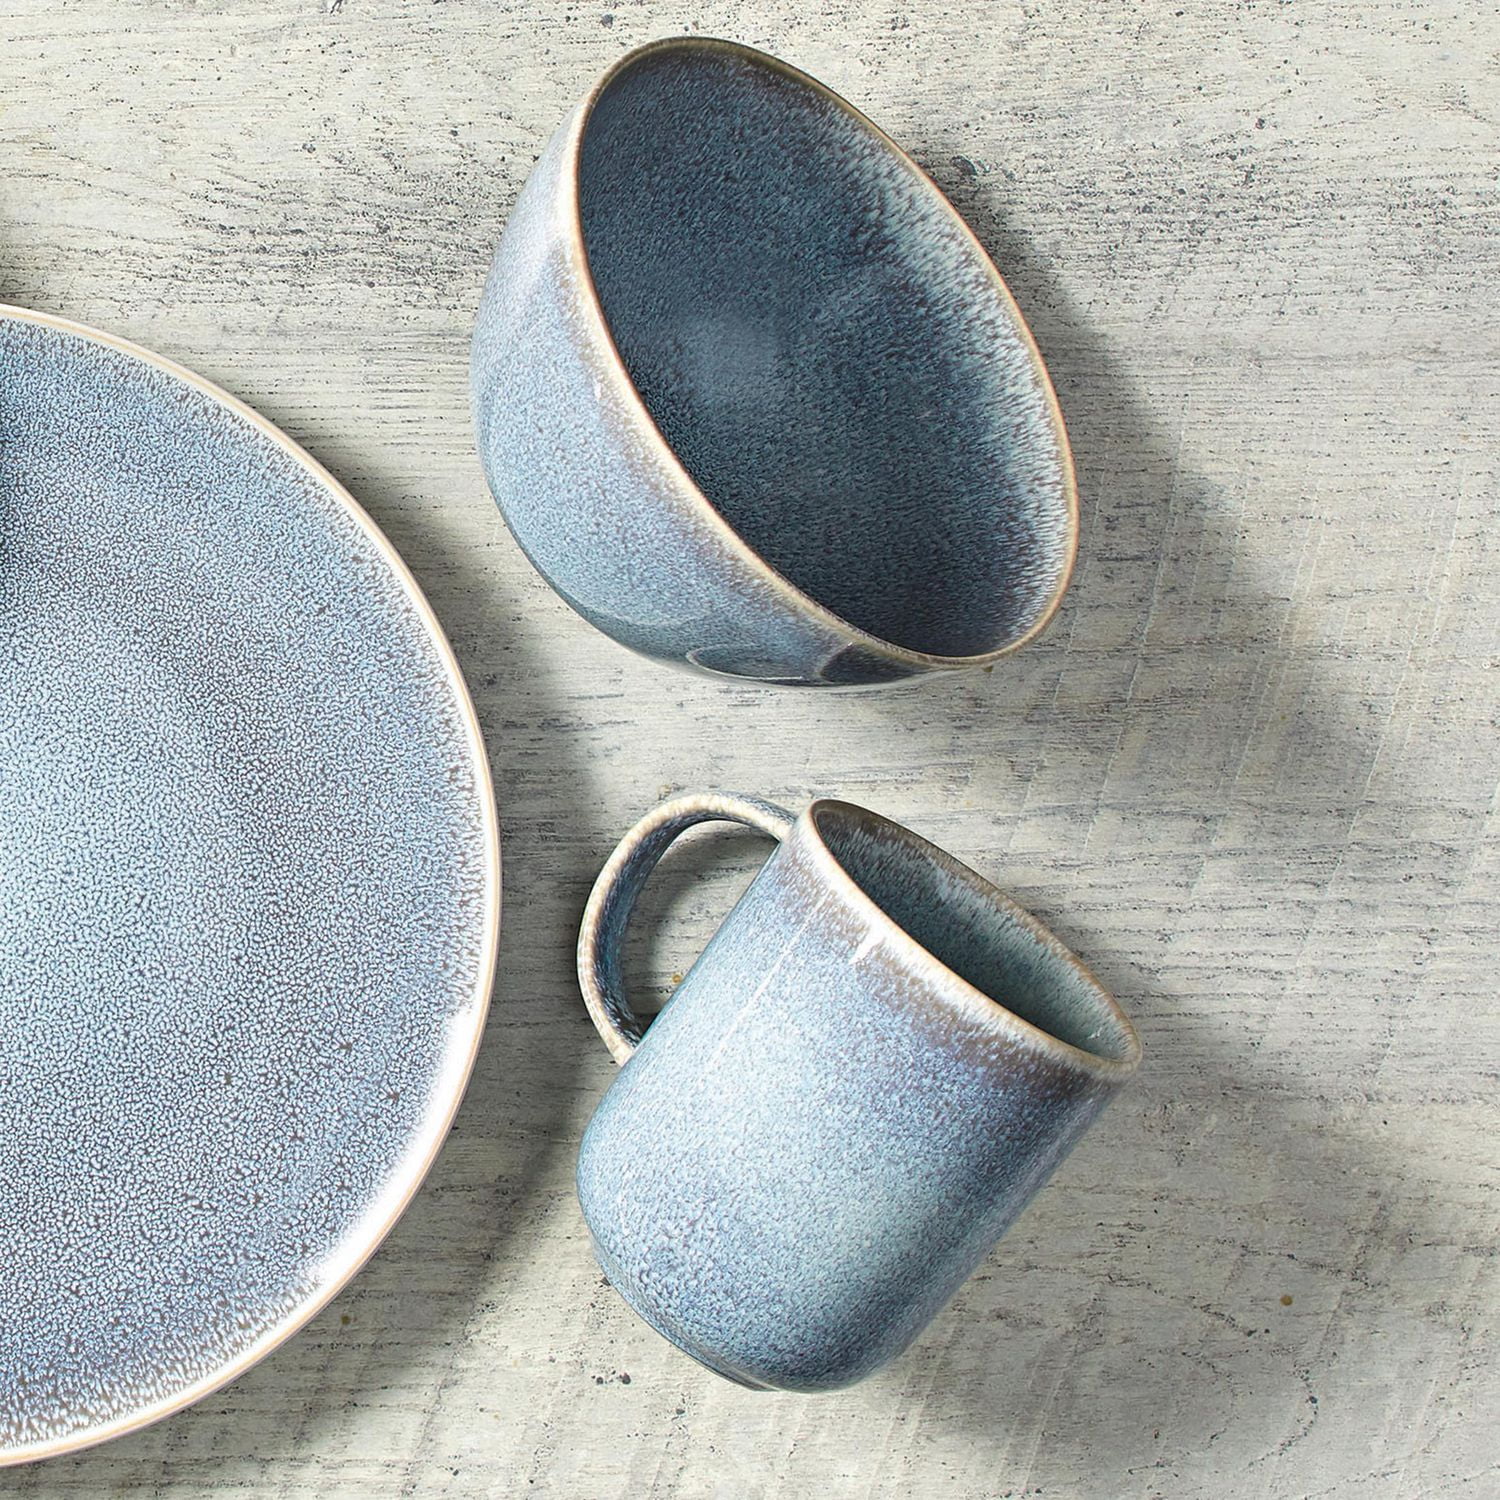 Over & Back Stoneware Dinnerware Set, 16 Piece in 2 Colours